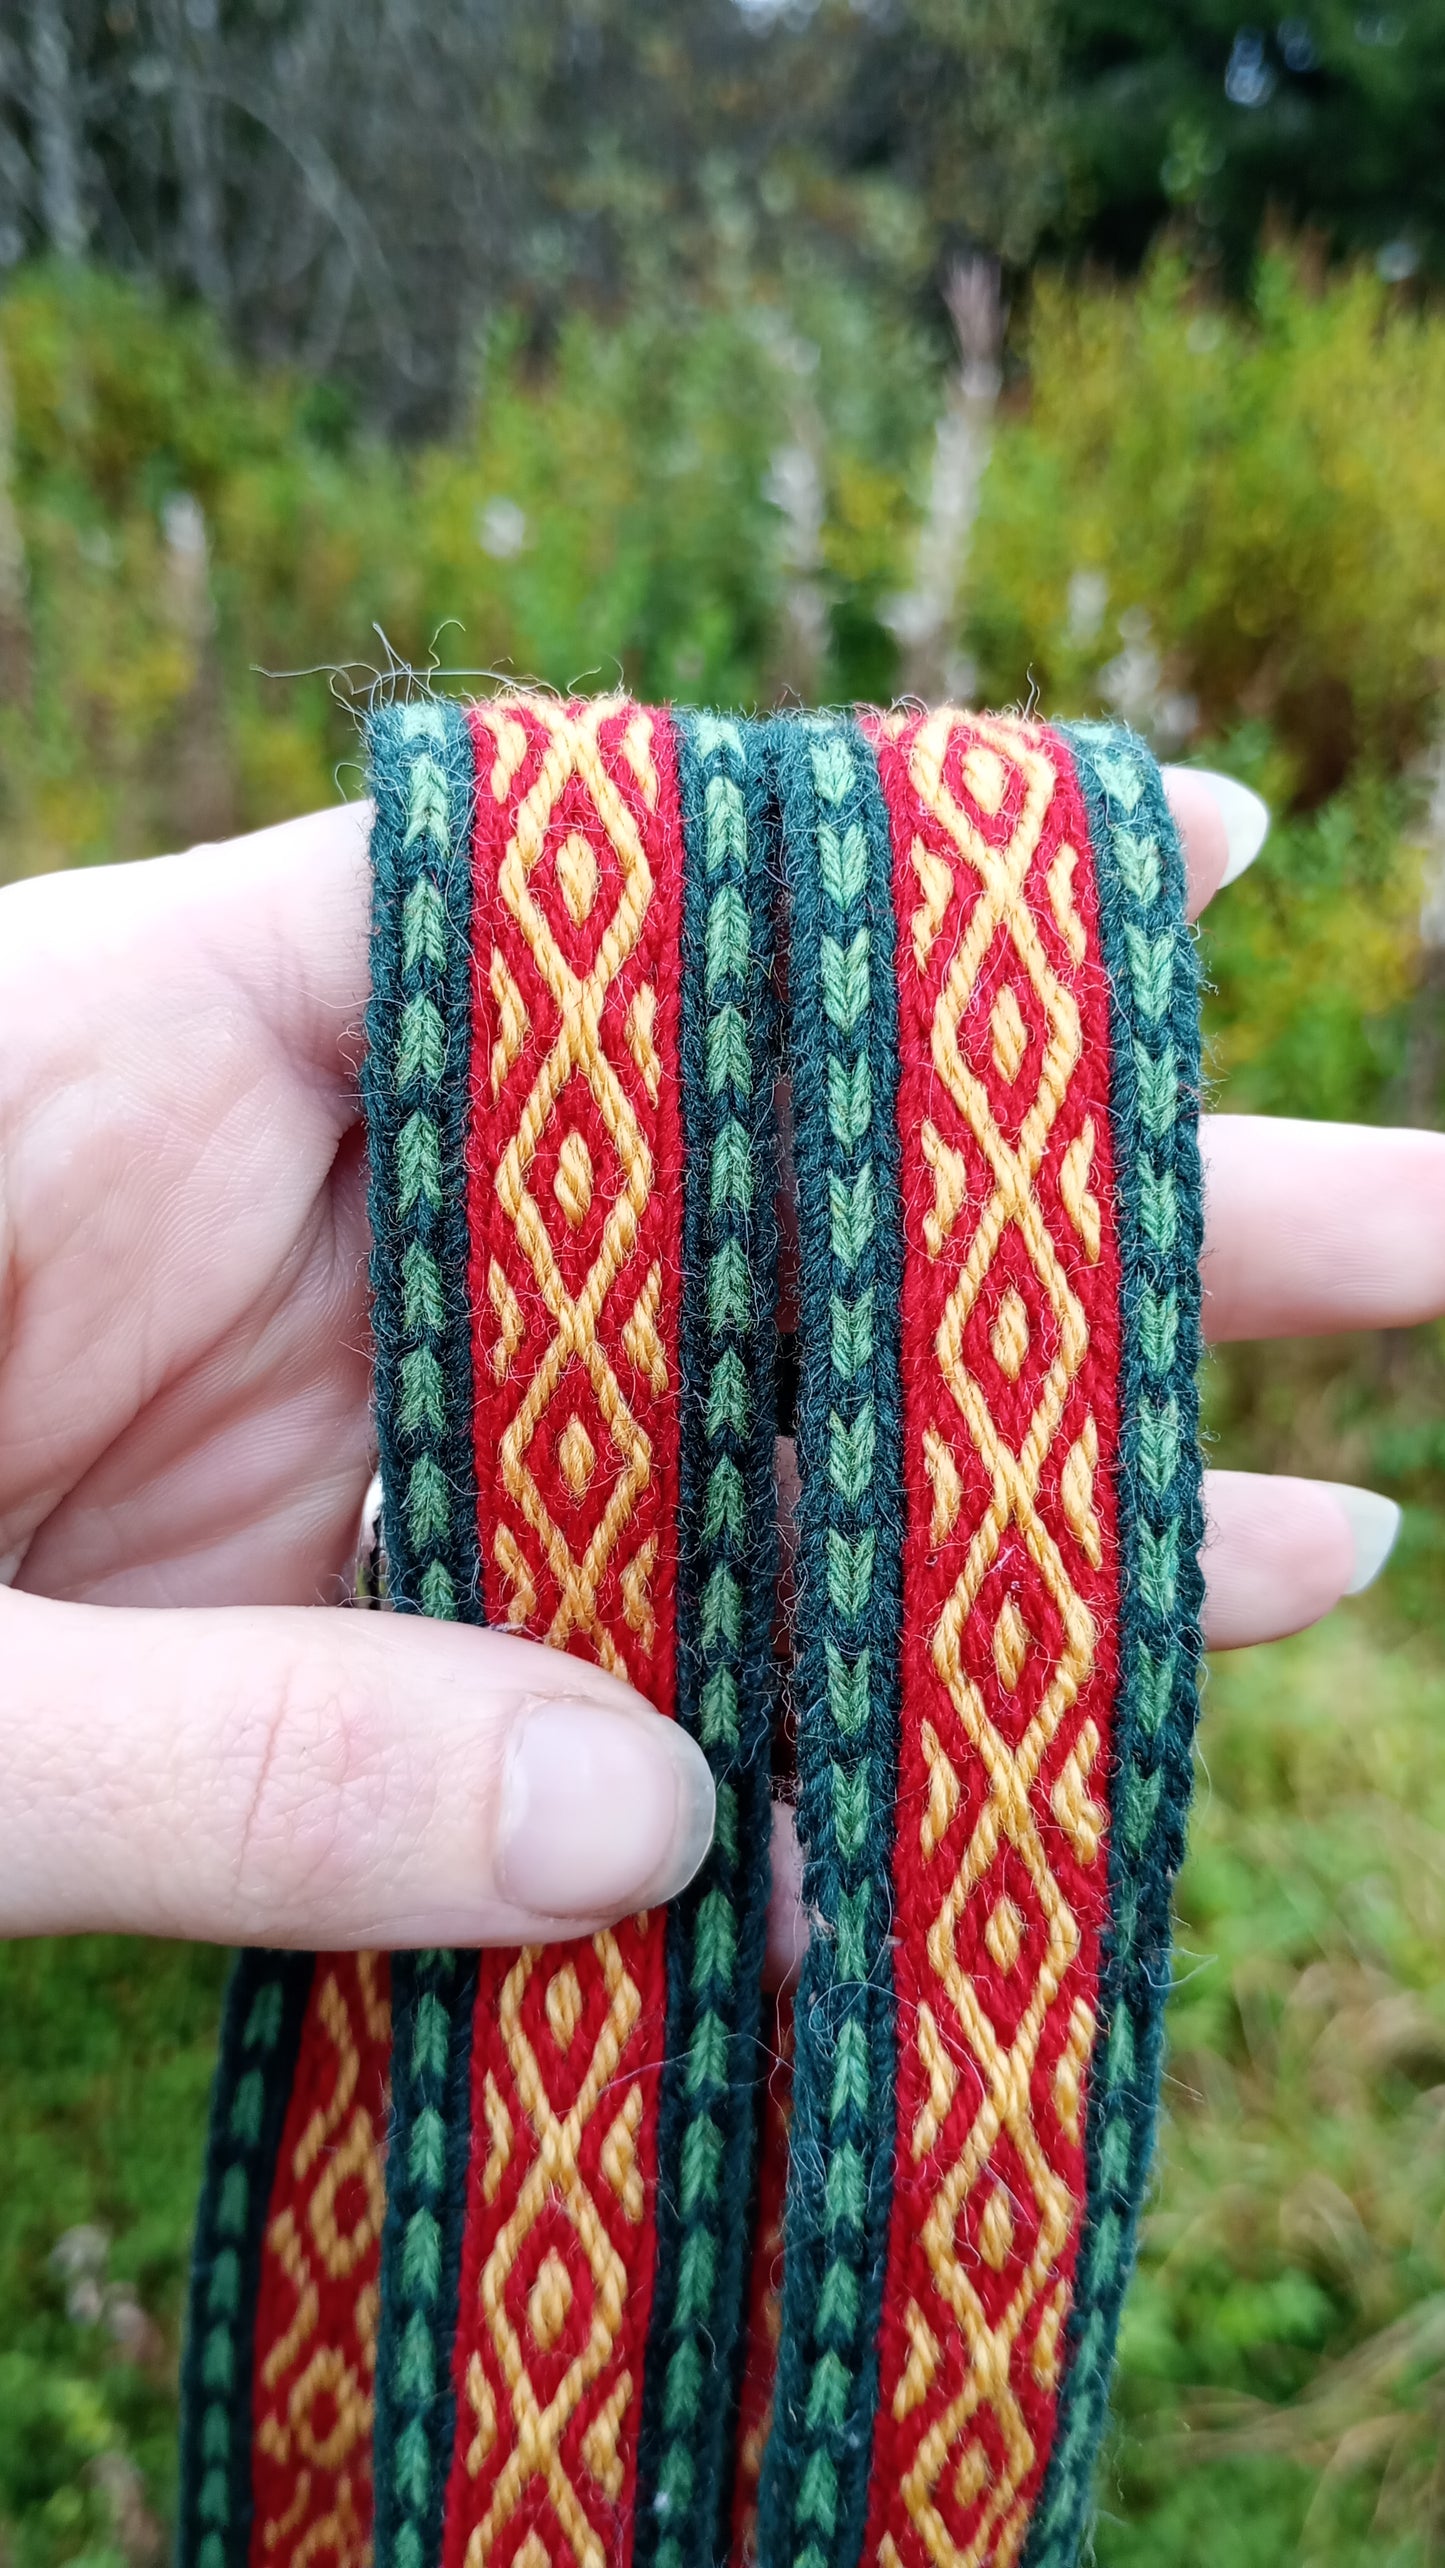 Simple band in bright green and red